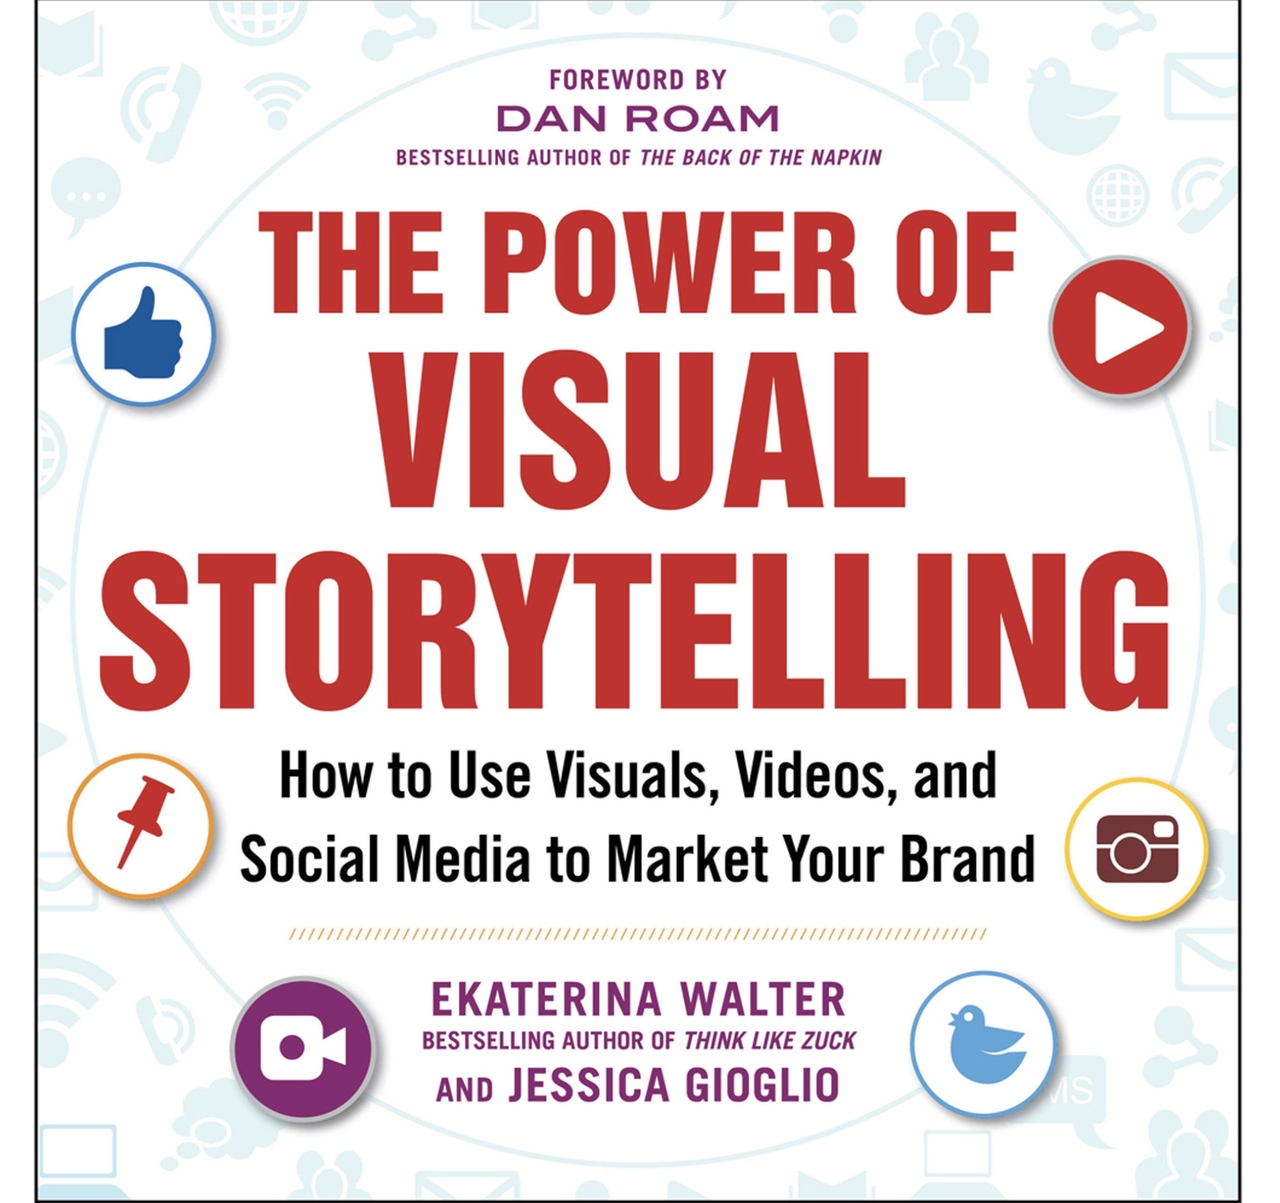 The Power Of Visual Storytelling. How To Use Visuals, Videos, And Social Media To Market Your Brand (Walter, 2014)